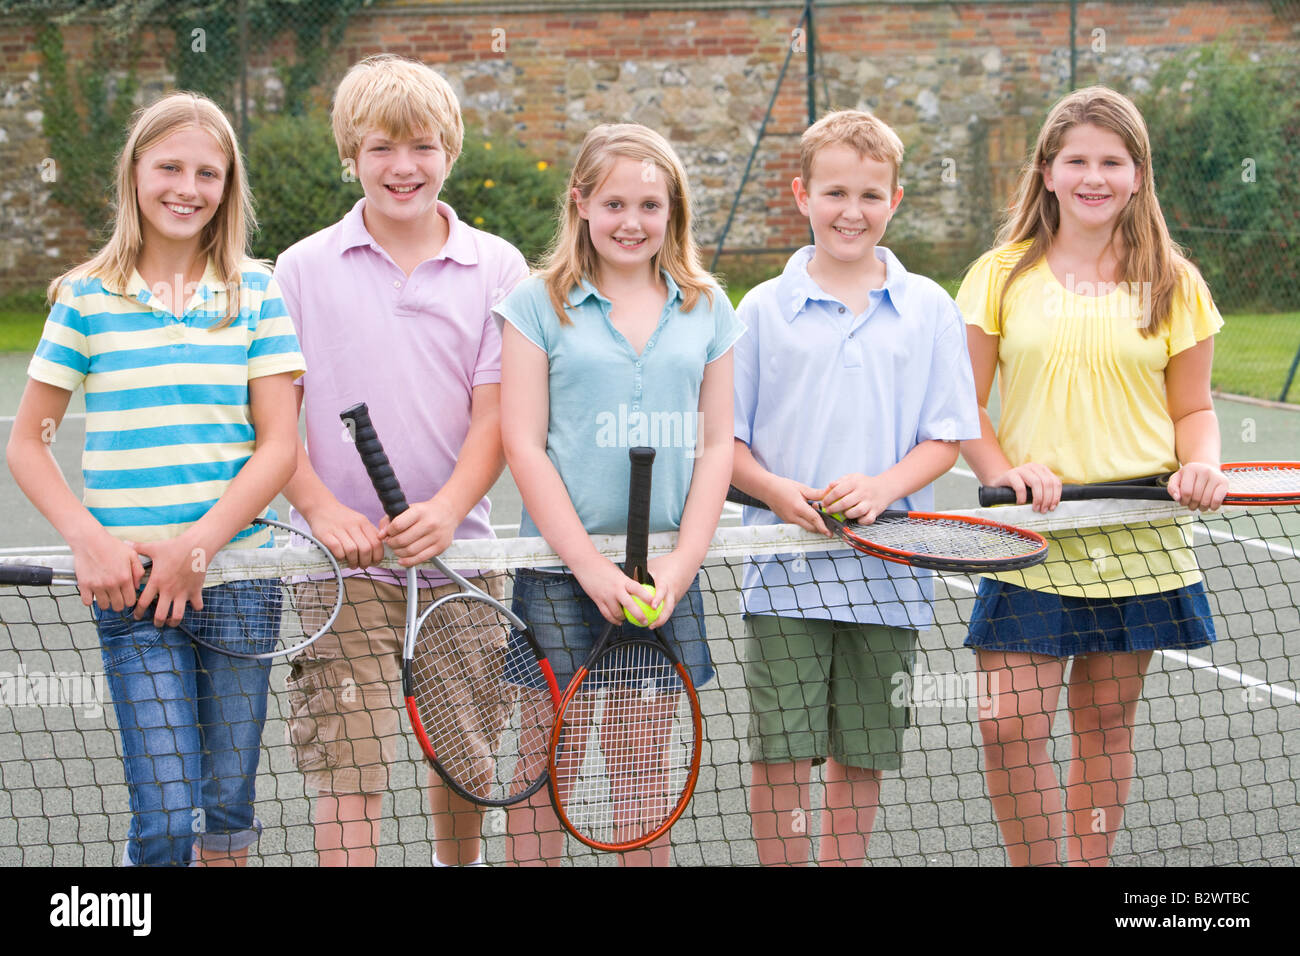 Five young friends with rackets on tennis court smiling Stock Photo